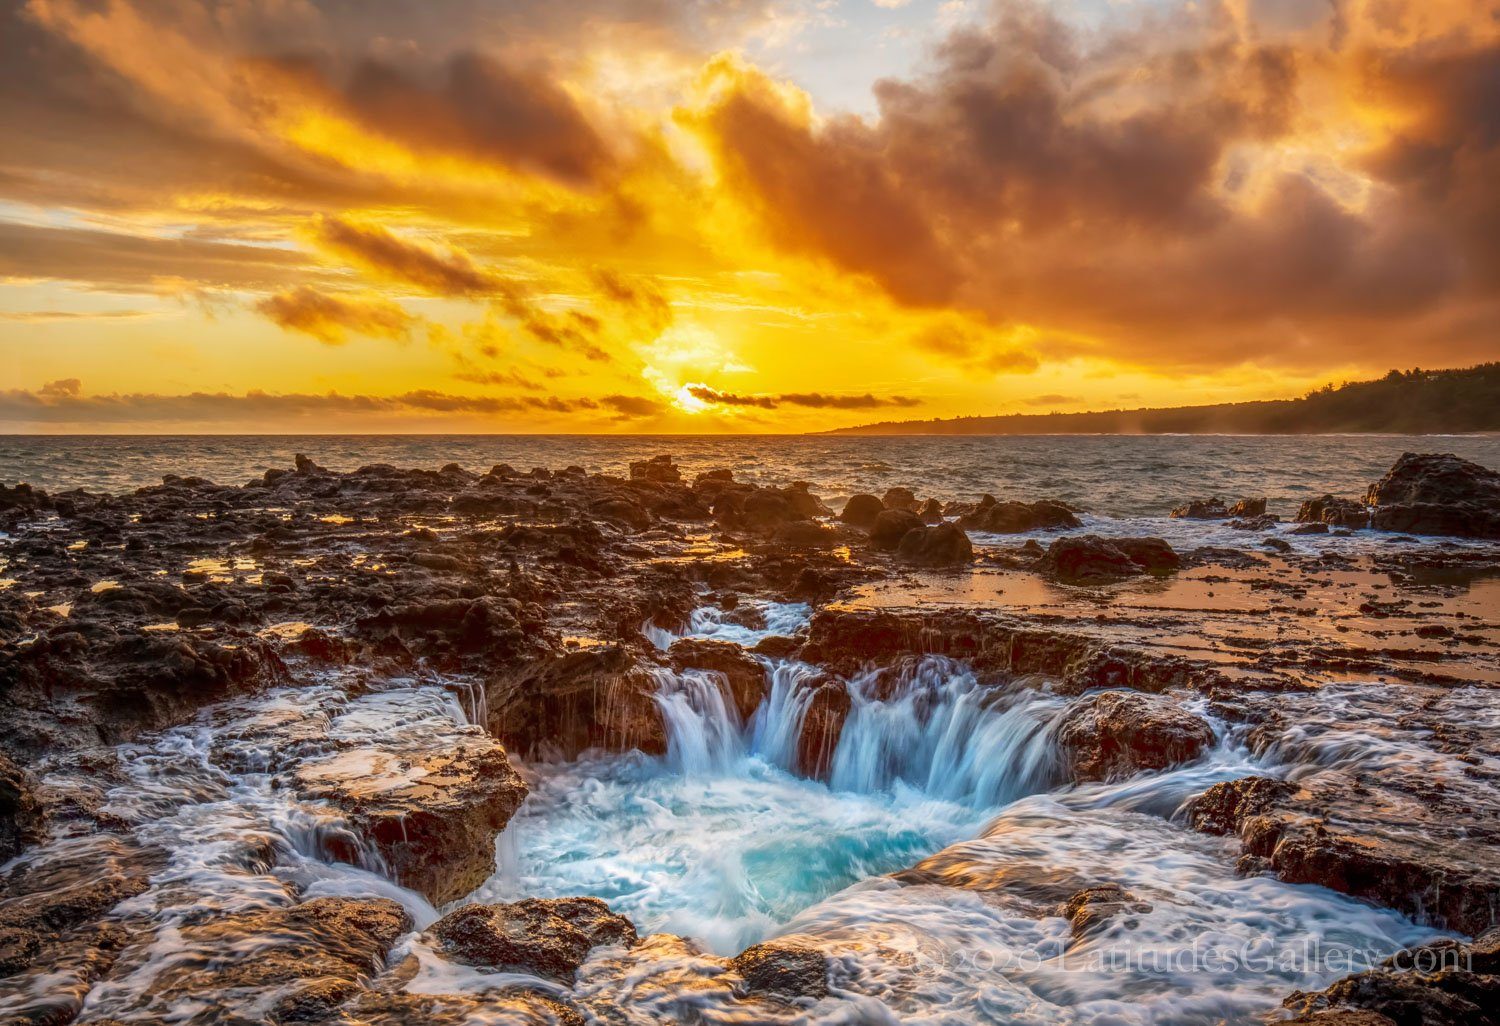 Office wall art photograph of an orange sunset above the North Shore of Kauai as water channels pour over jagged rocks.